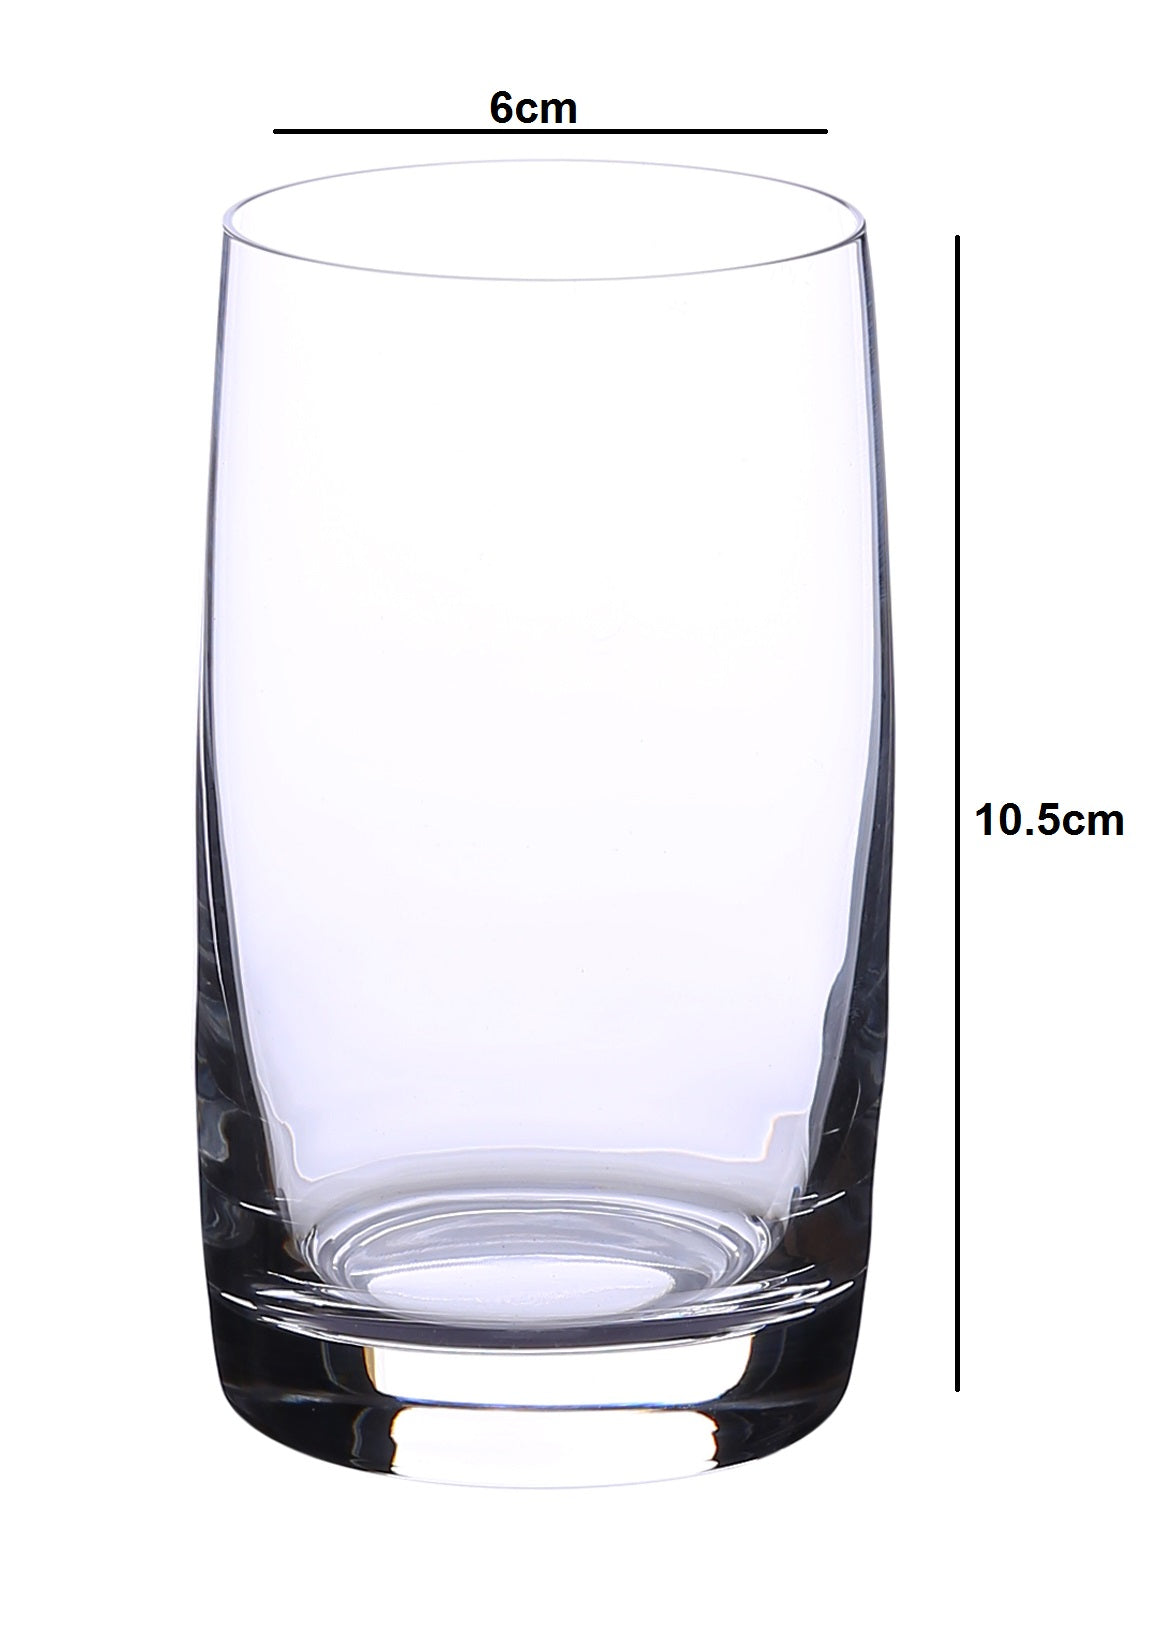 Dimensions of a Versatile Glassware - Ideal for water, juice, and other beverages.